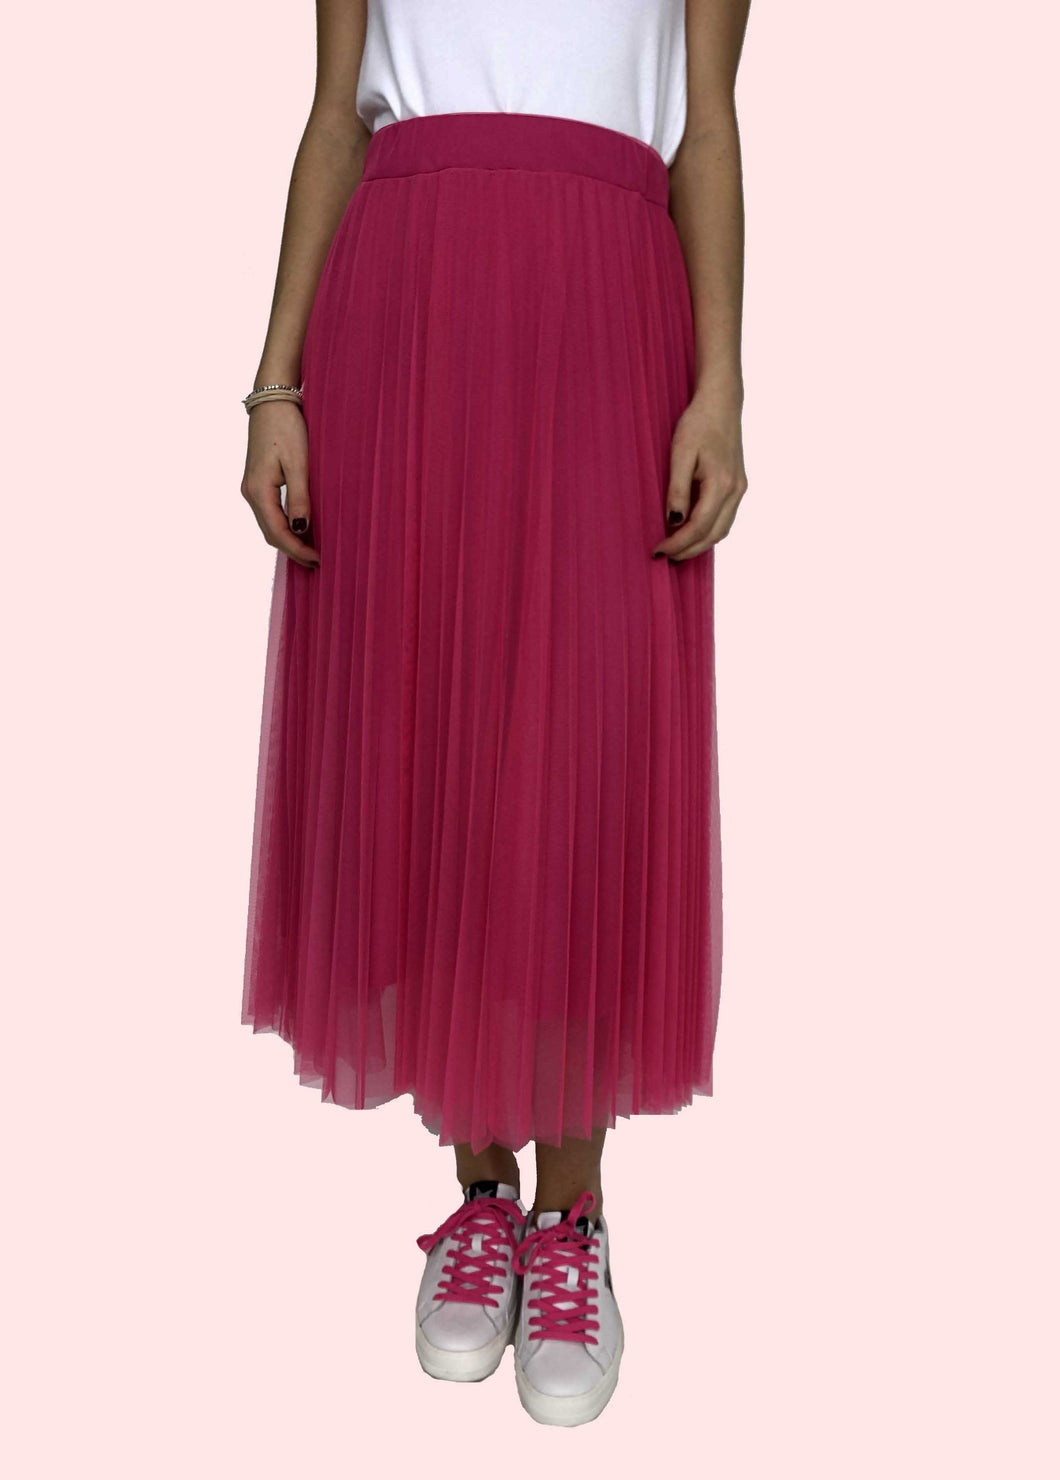 GONNA IN TULLE FUCSIA